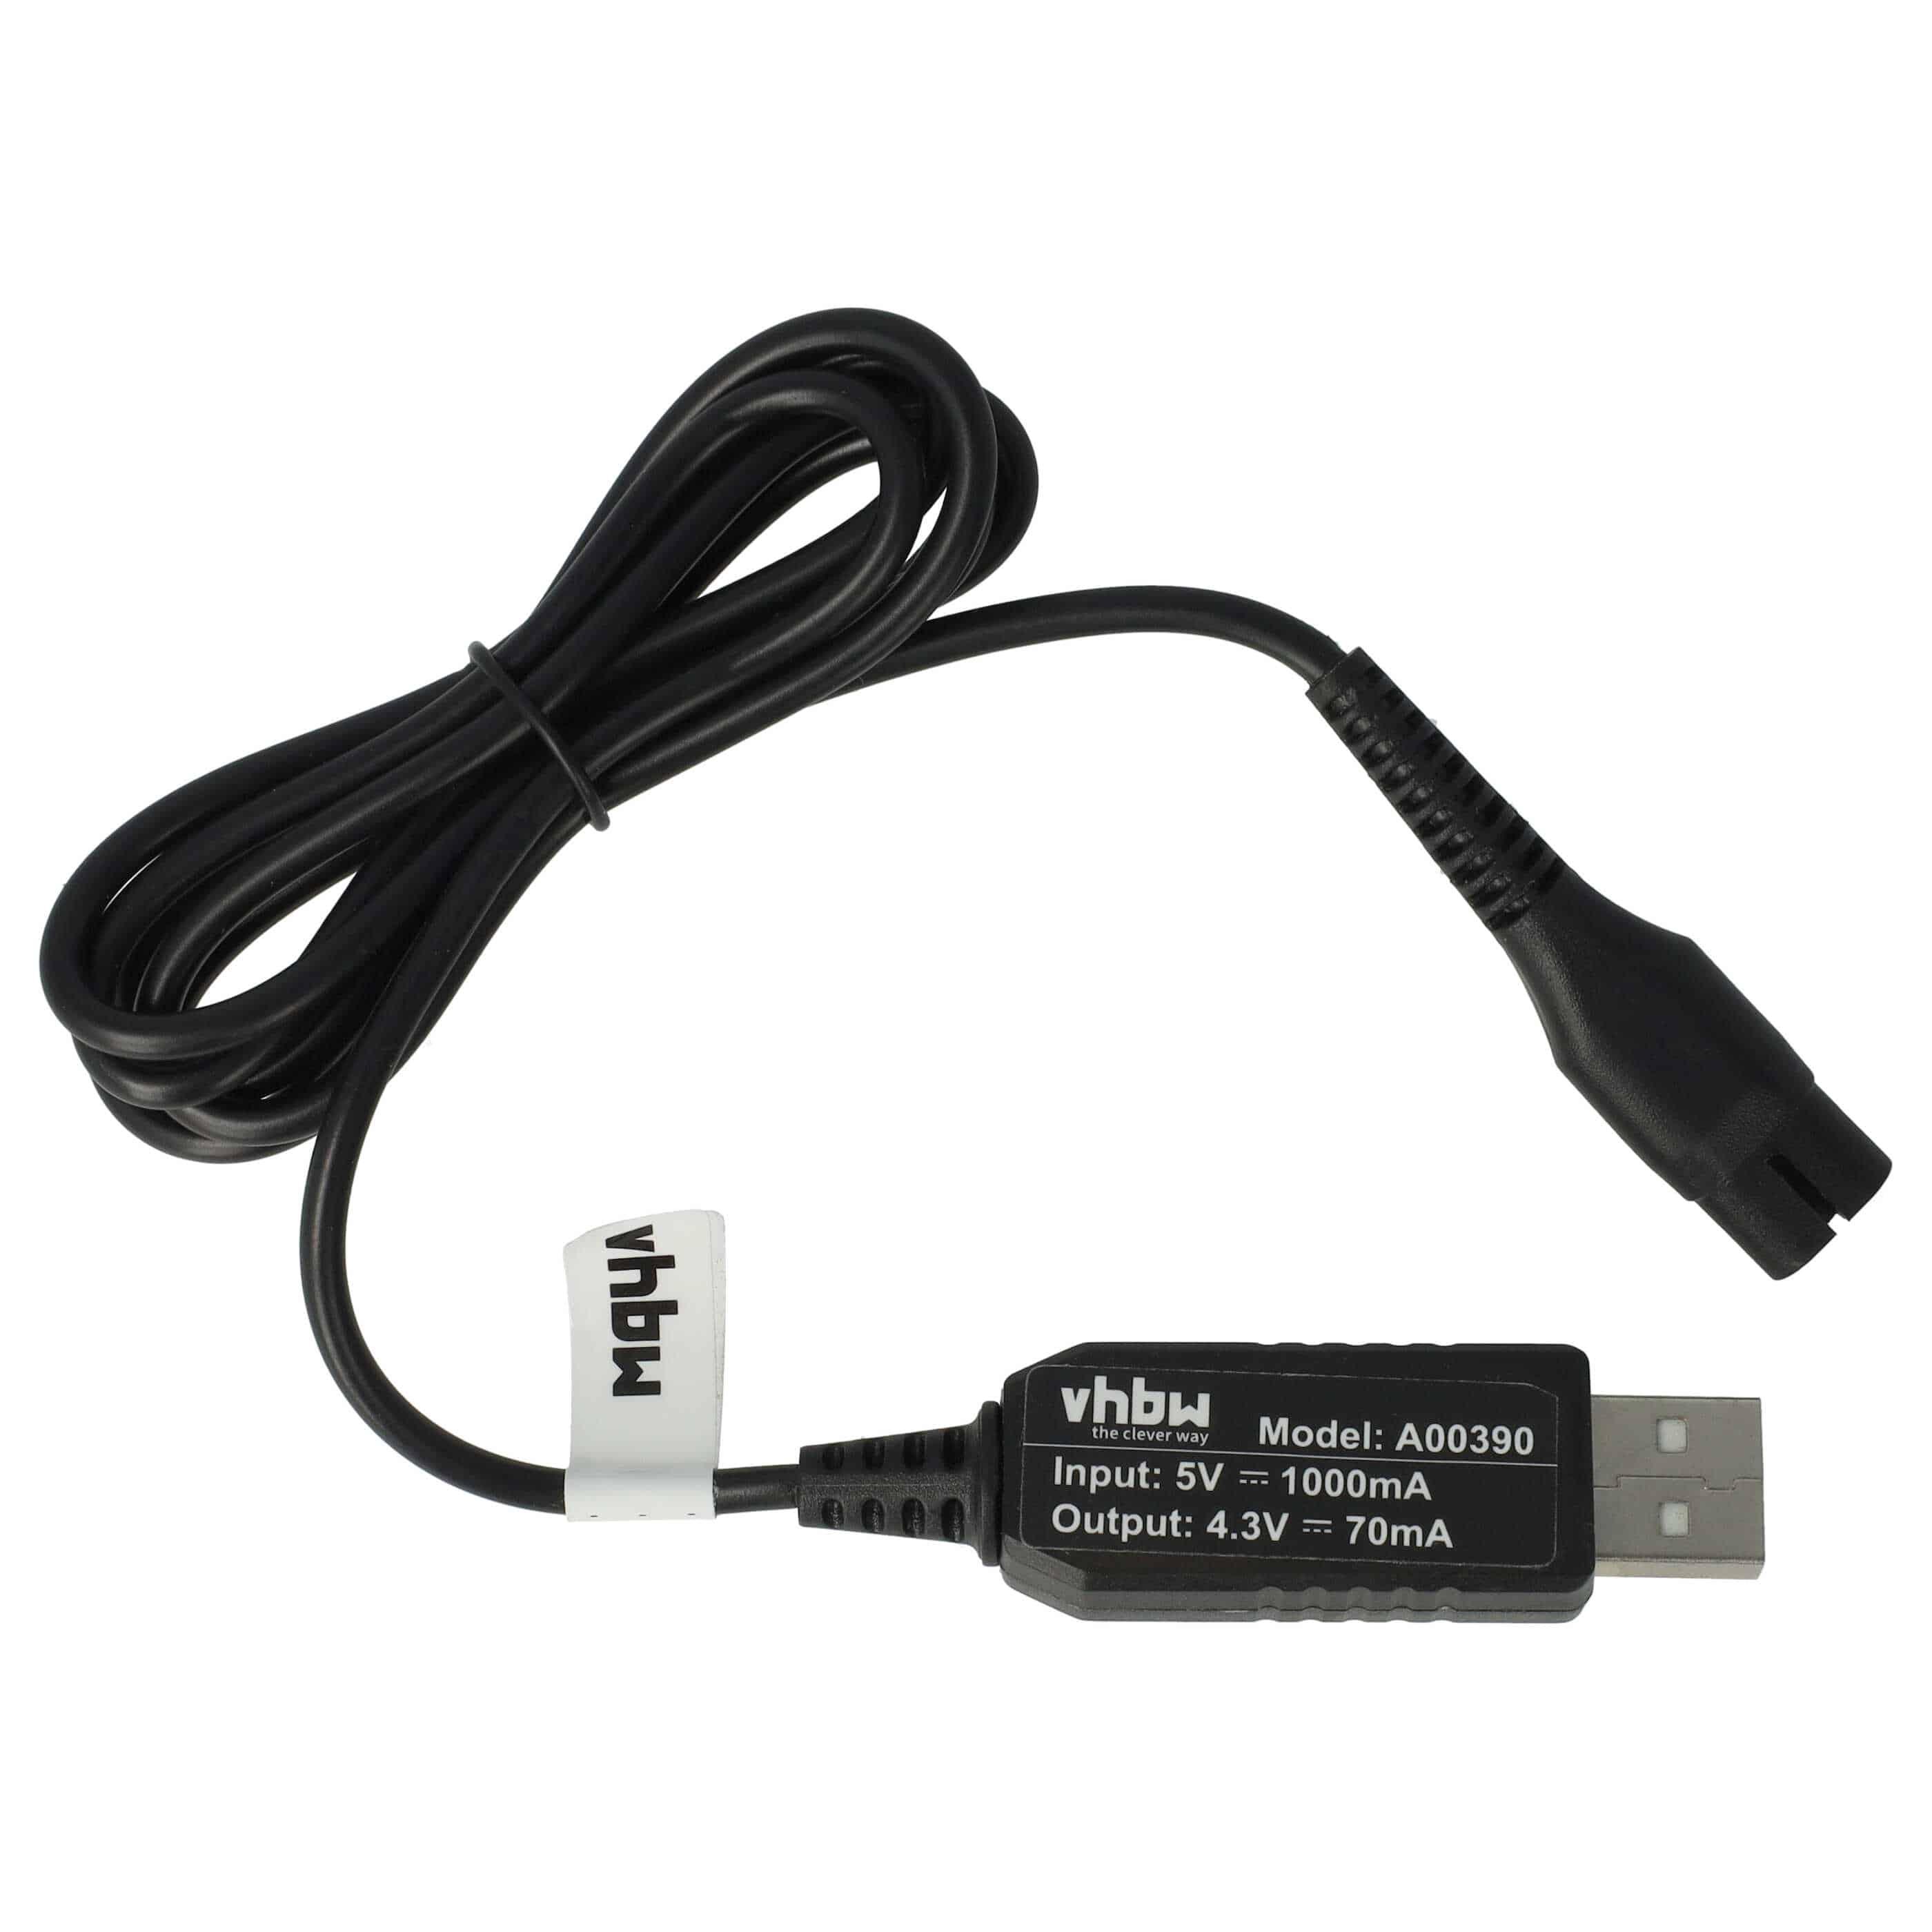 USB Charging Cable suitable for Philips S510 Shaver - 120 cm